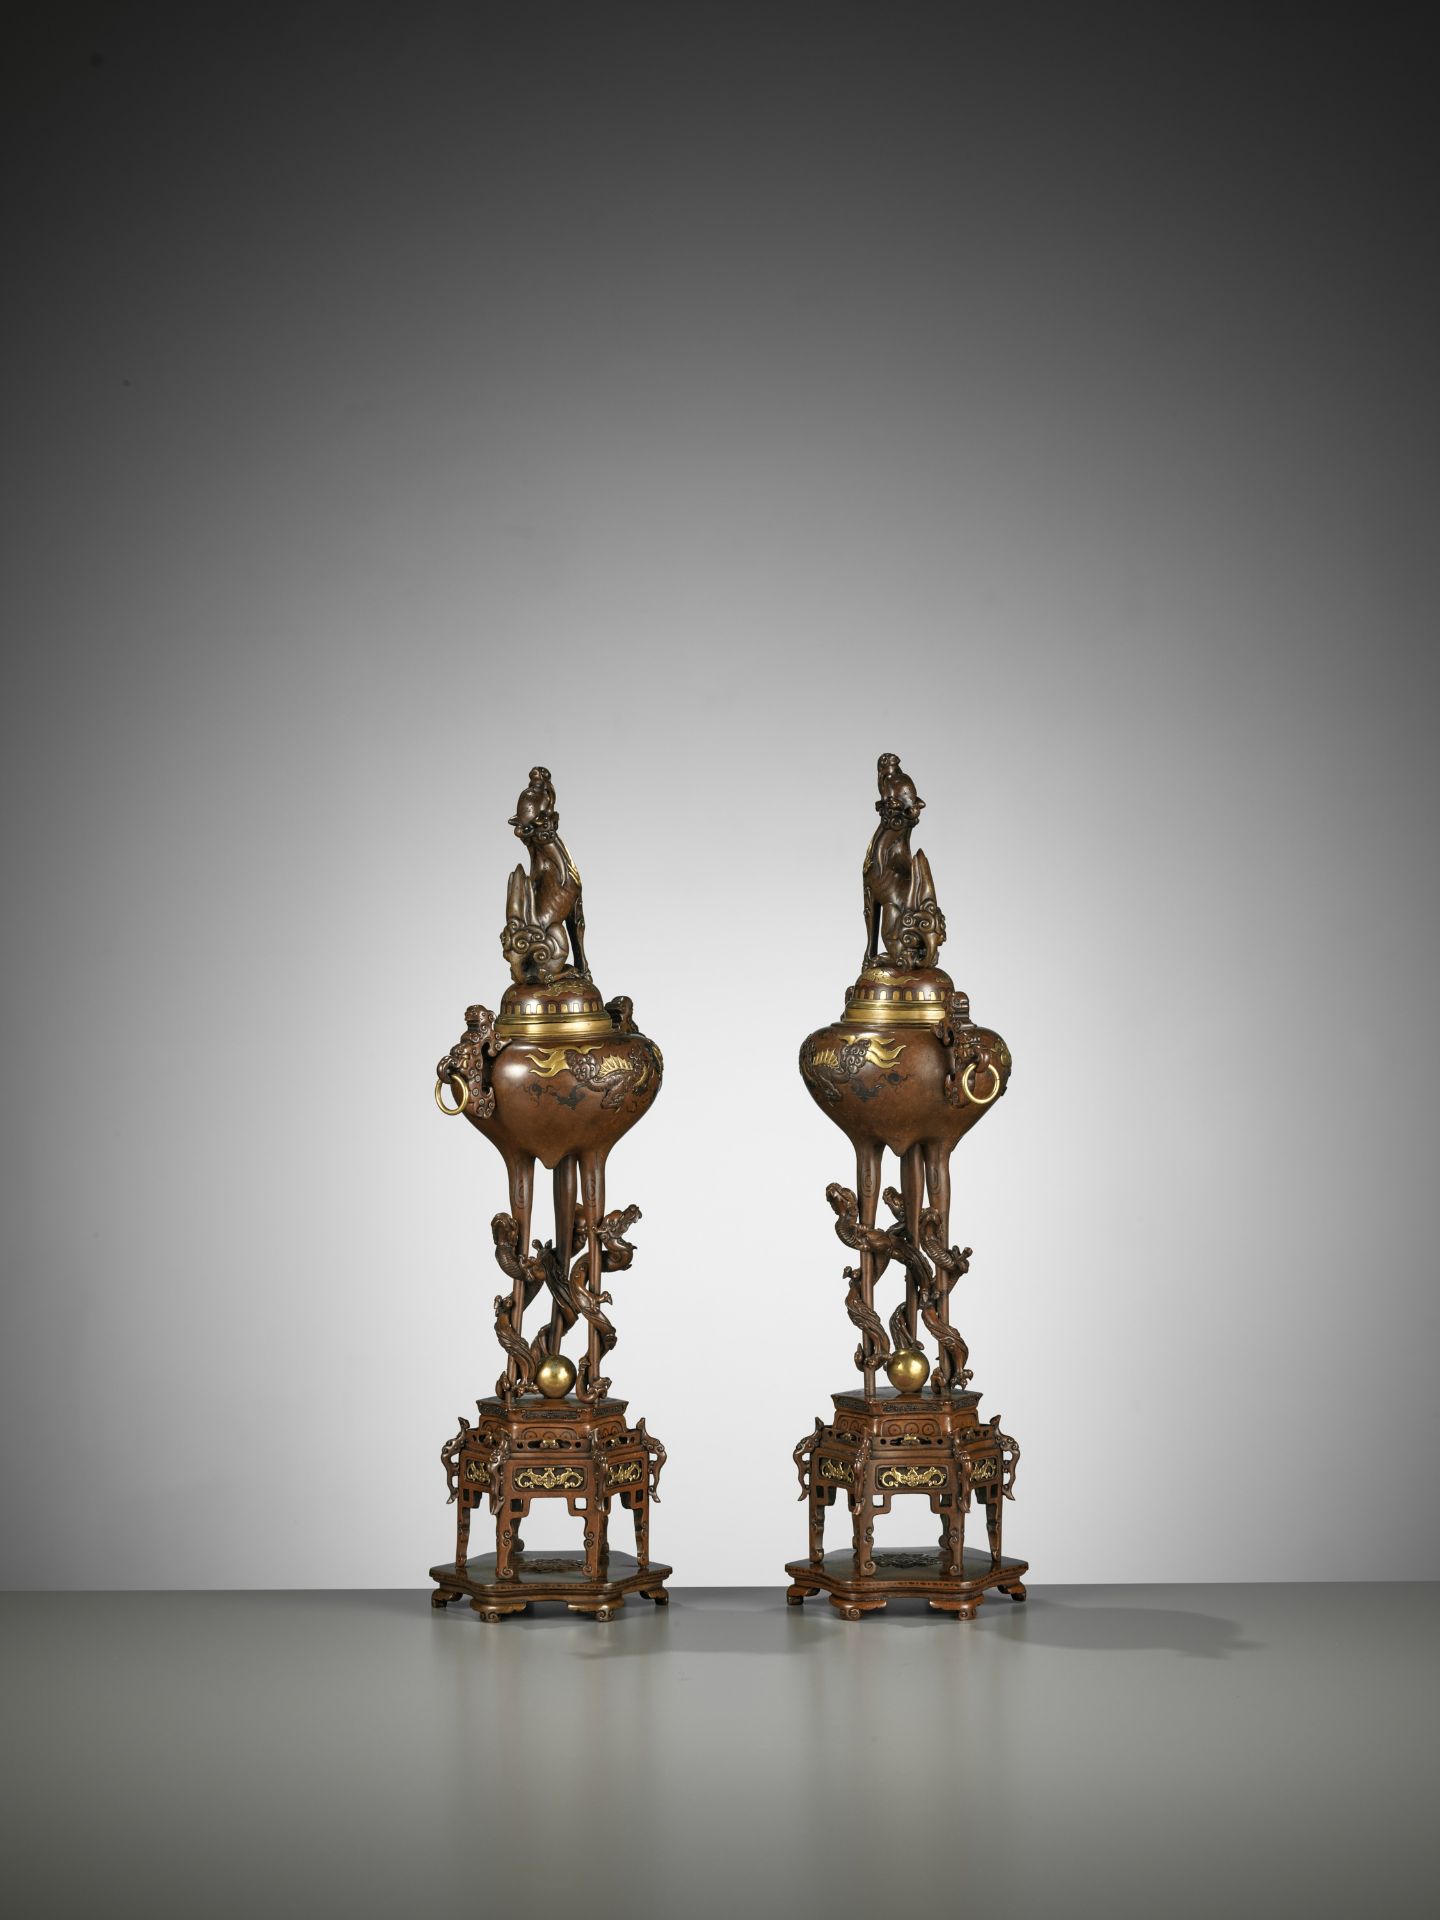 A PAIR OF SUPERB GOLD-INLAID BRONZE 'MYTHICAL BEASTS' KORO (INCENSE BURNERS) AND COVERS - Image 12 of 20